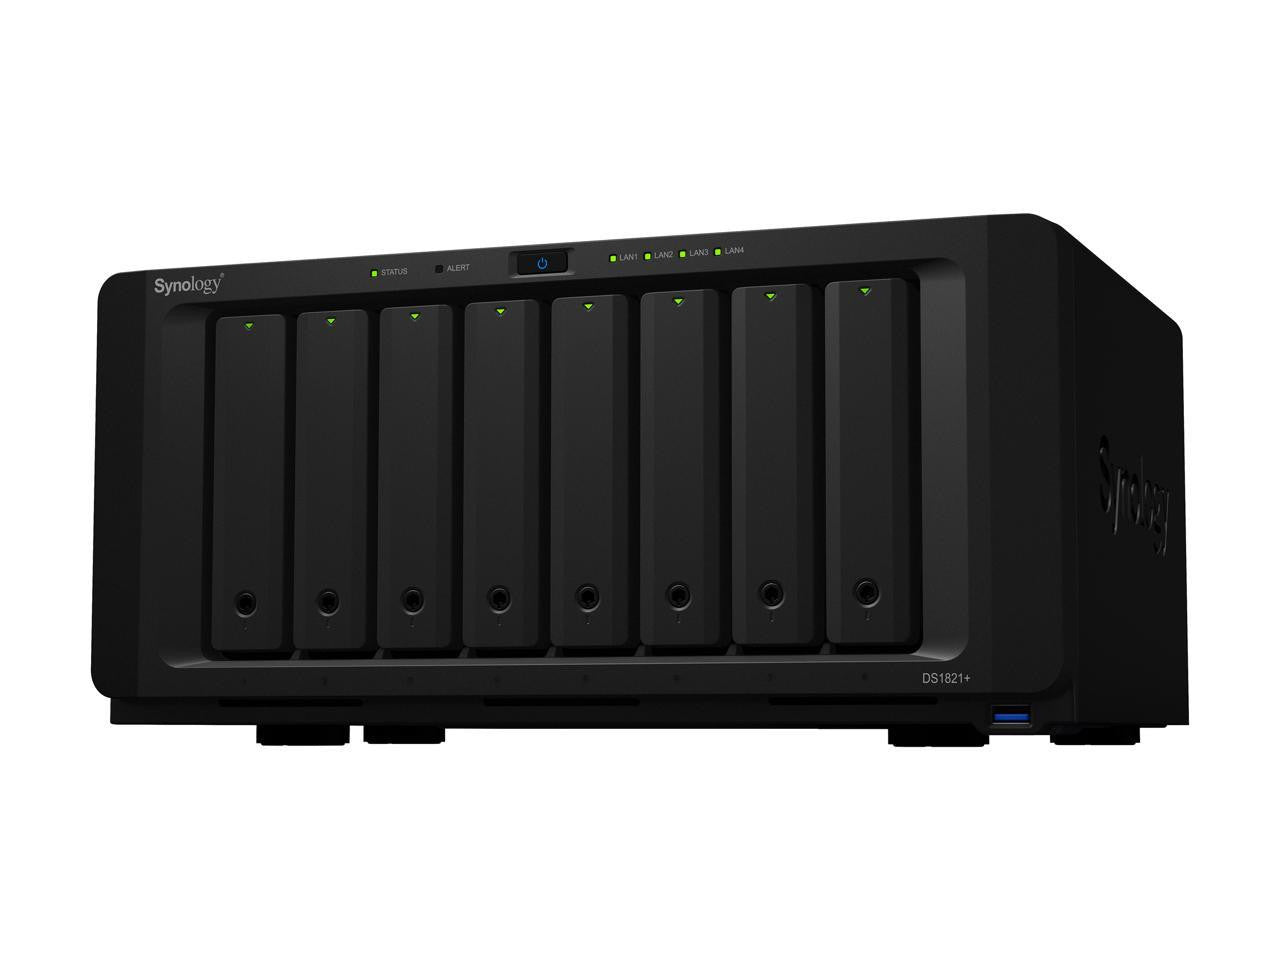 Synology DS1821+ 8-BAY DiskStation with 16GB Synology RAM and 32TB (8x4TB) Western Digital RED PLUS Drives Fully Assembled and Tested